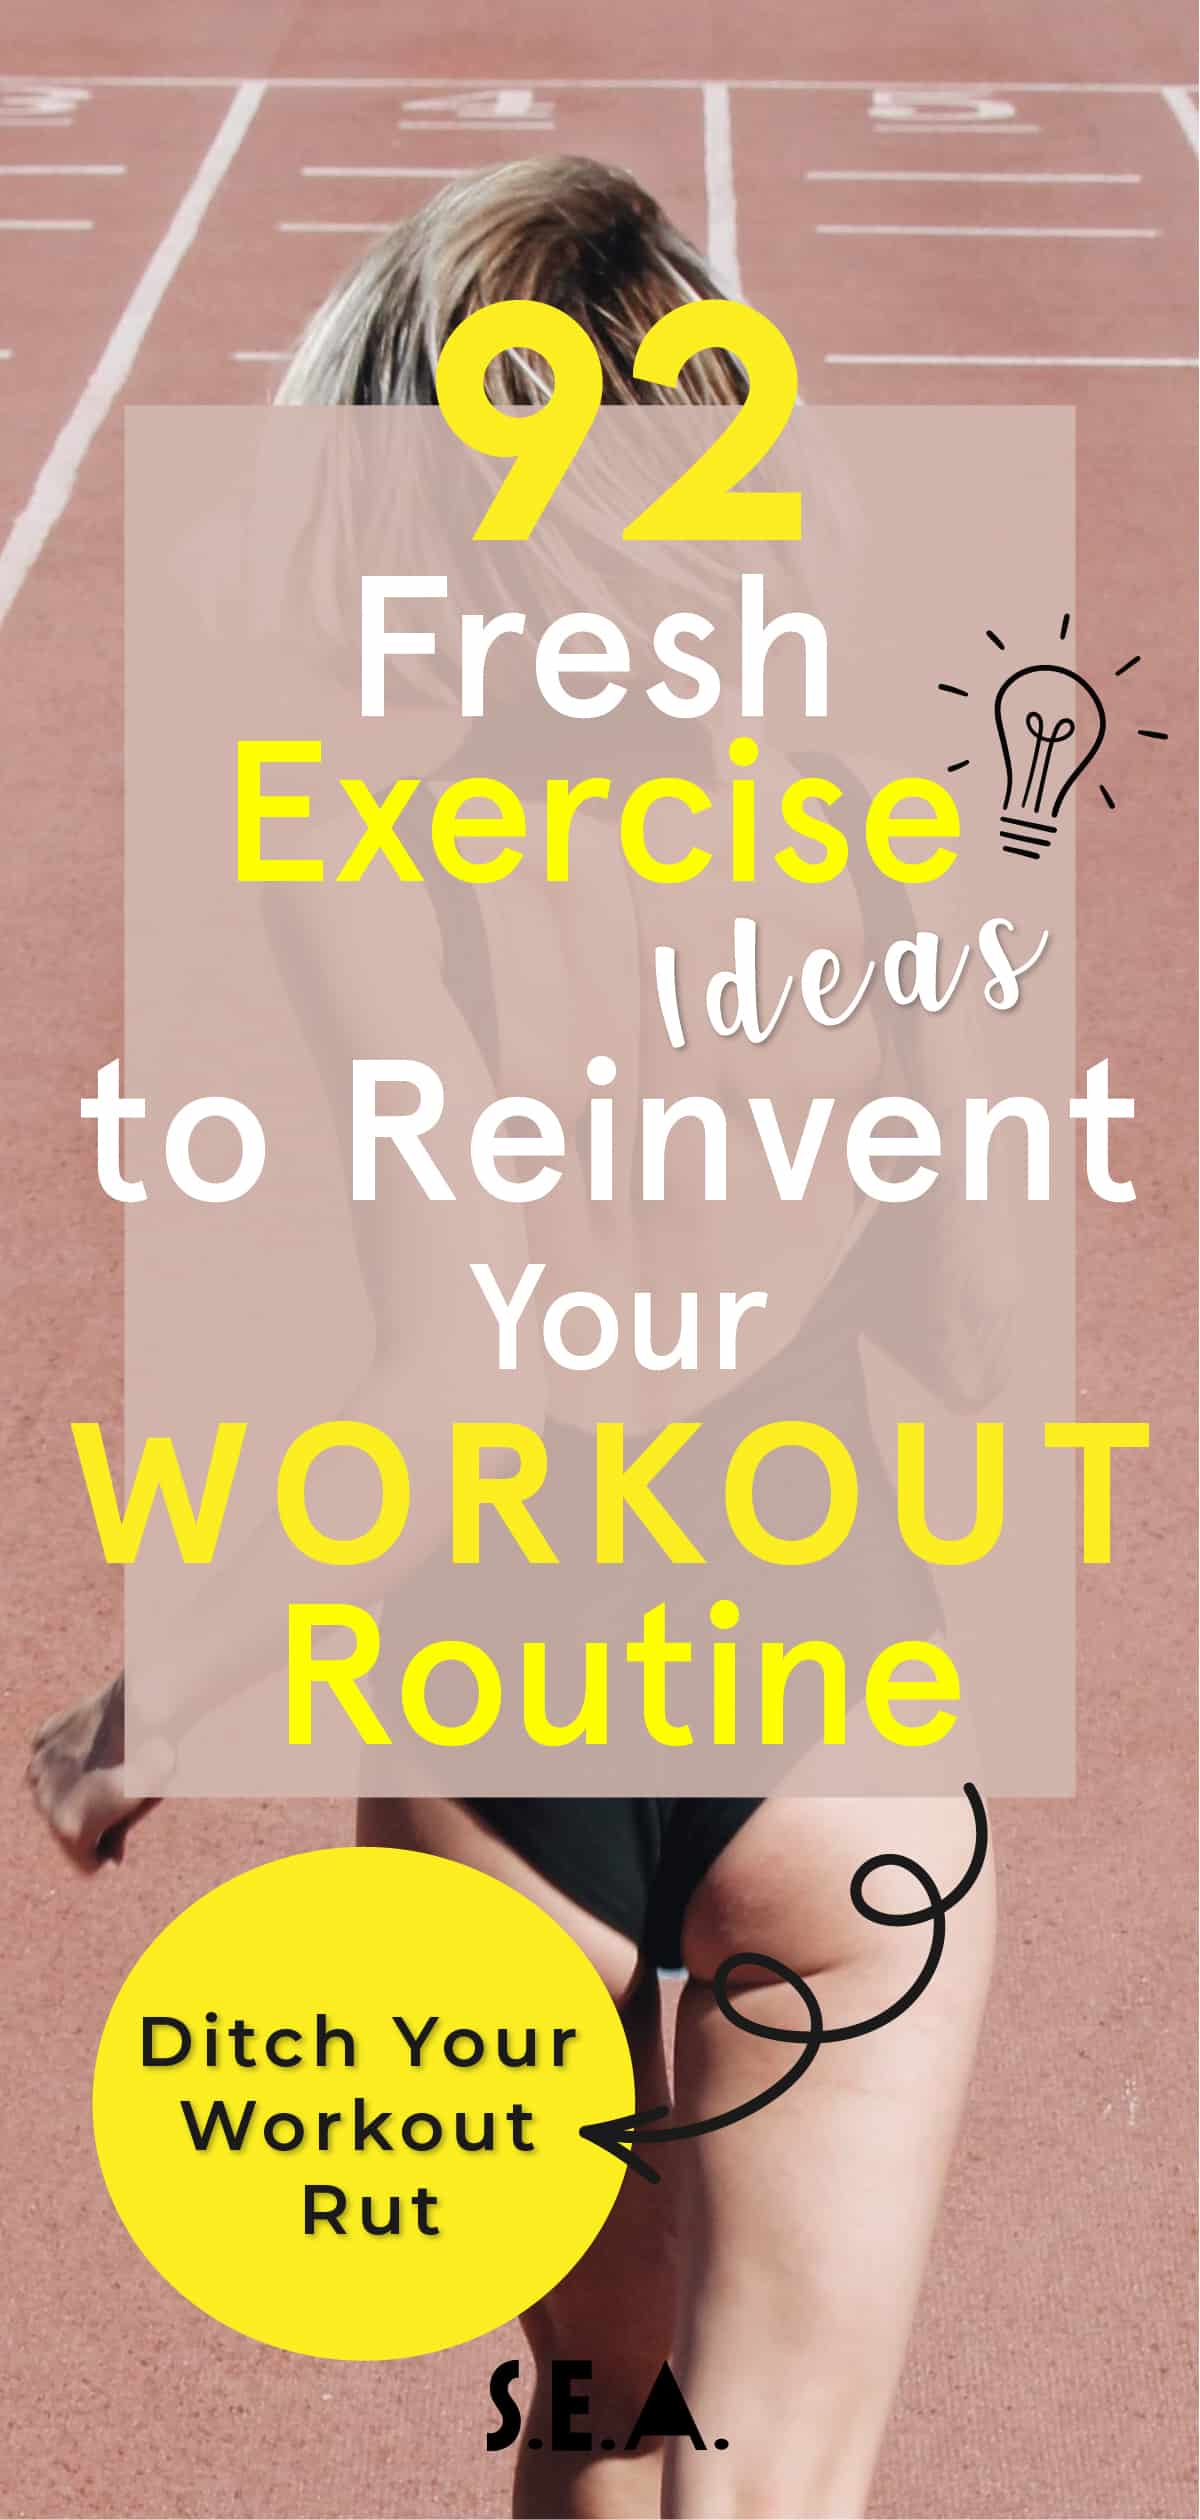 92-exercise-ideas-to-reinvent-your-routine